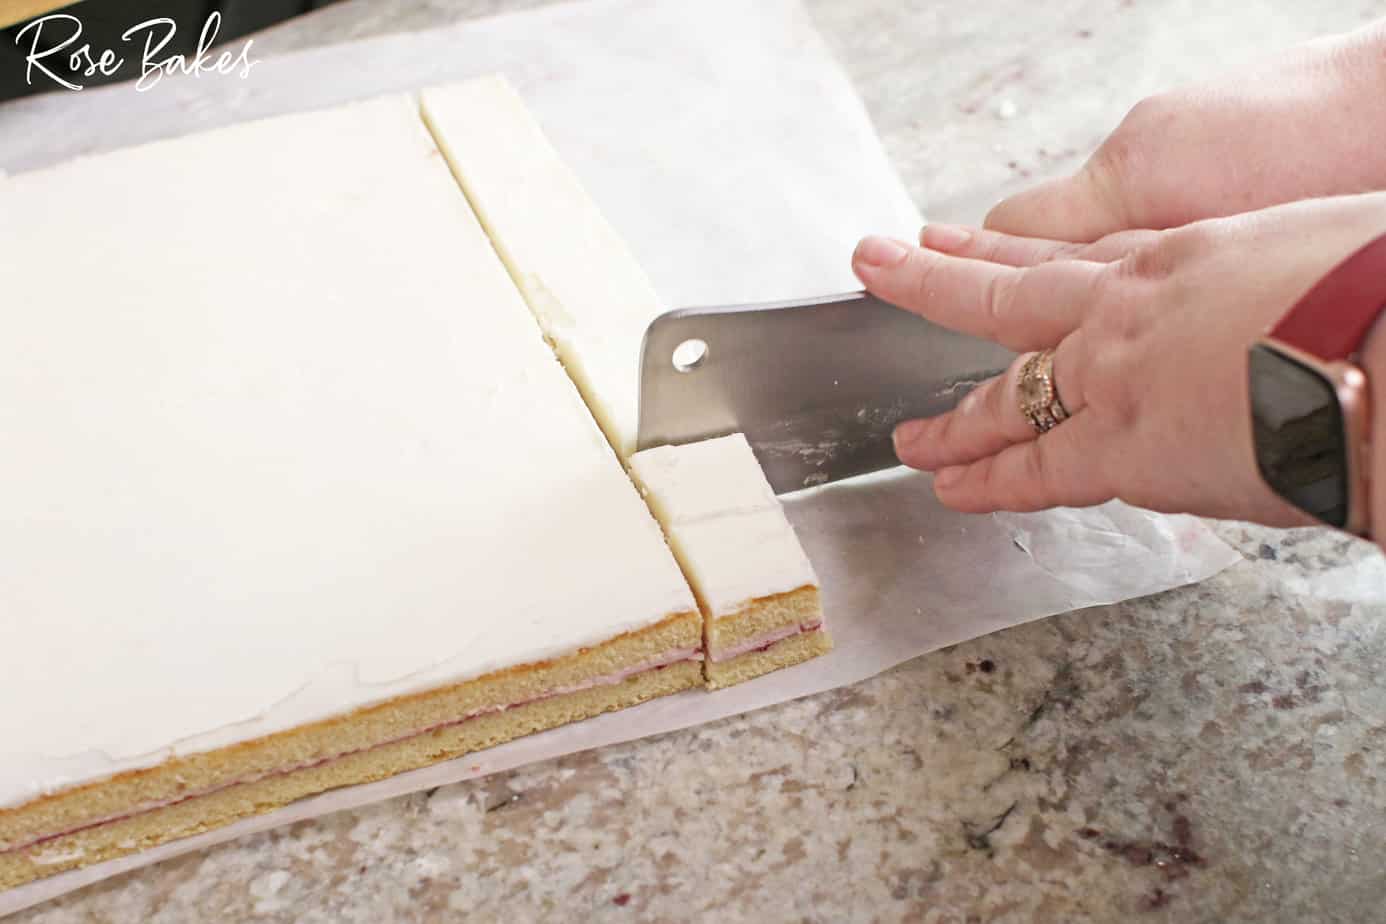 Slicing the cake into squares.